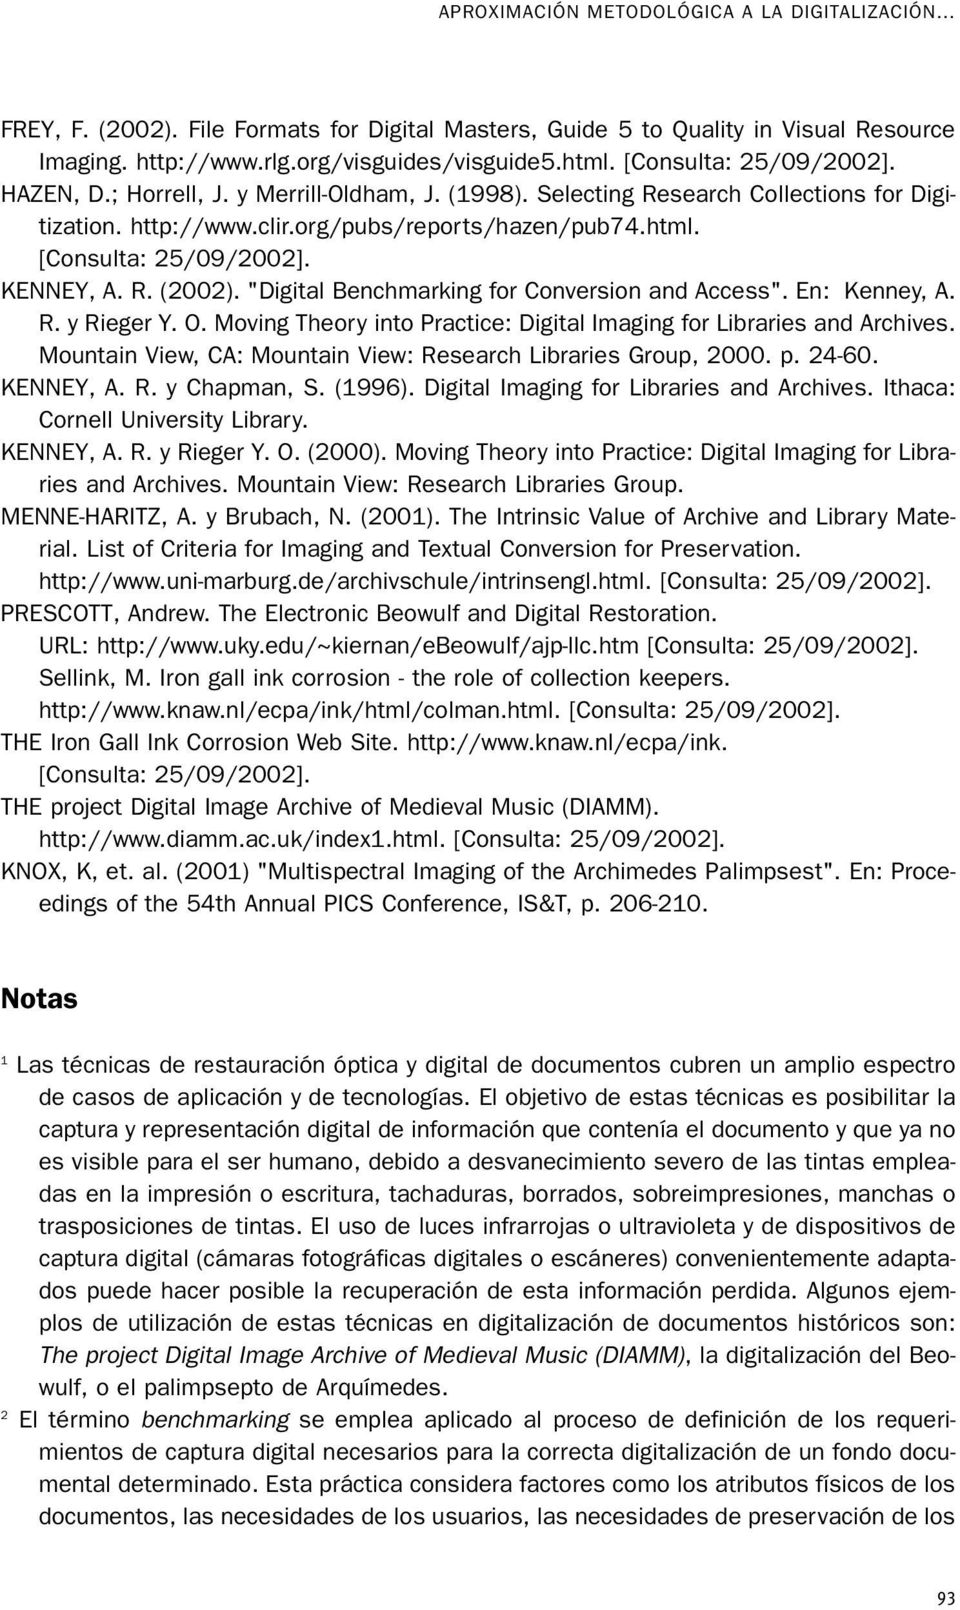 KENNEY, A. R. (2002). "Digital Benchmarking for Conversion and Access". En: Kenney, A. R. y Rieger Y. O. Moving Theory into Practice: Digital Imaging for Libraries and Archives.